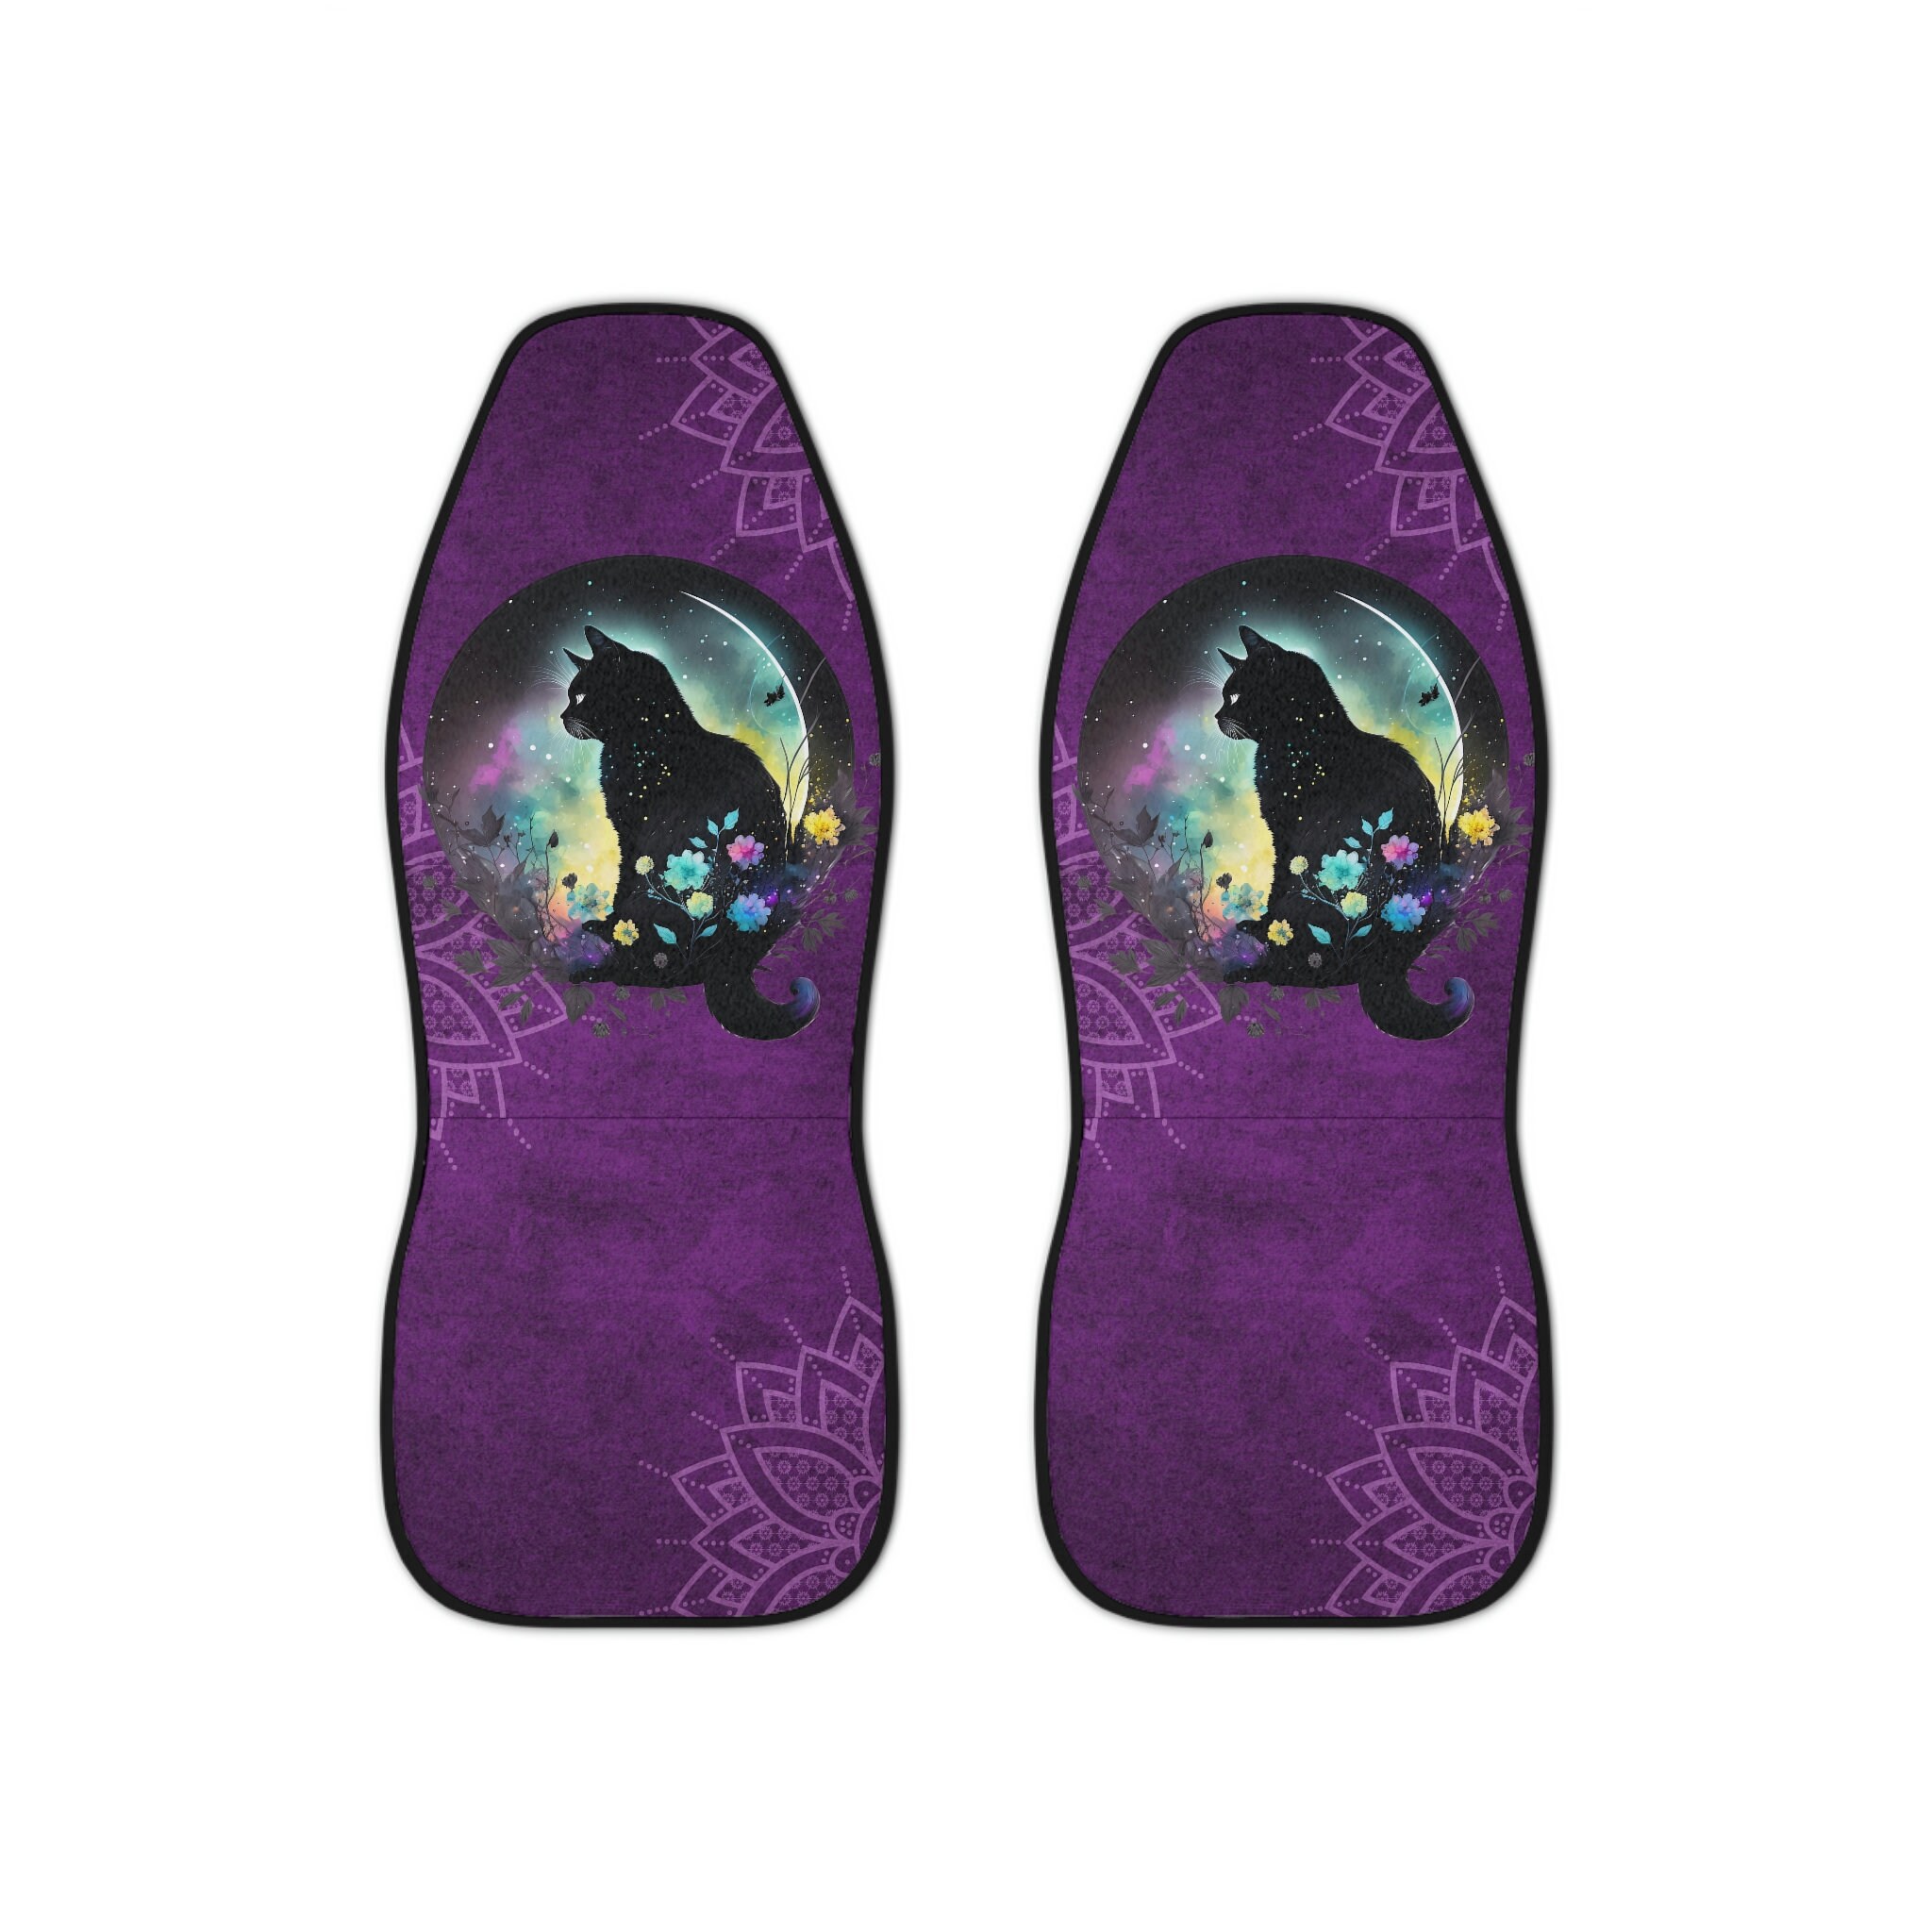 Black Cat Car Seat Covers, Seat Covers for Vehicle,Celestial Car Decorations, Cute Seat Covers